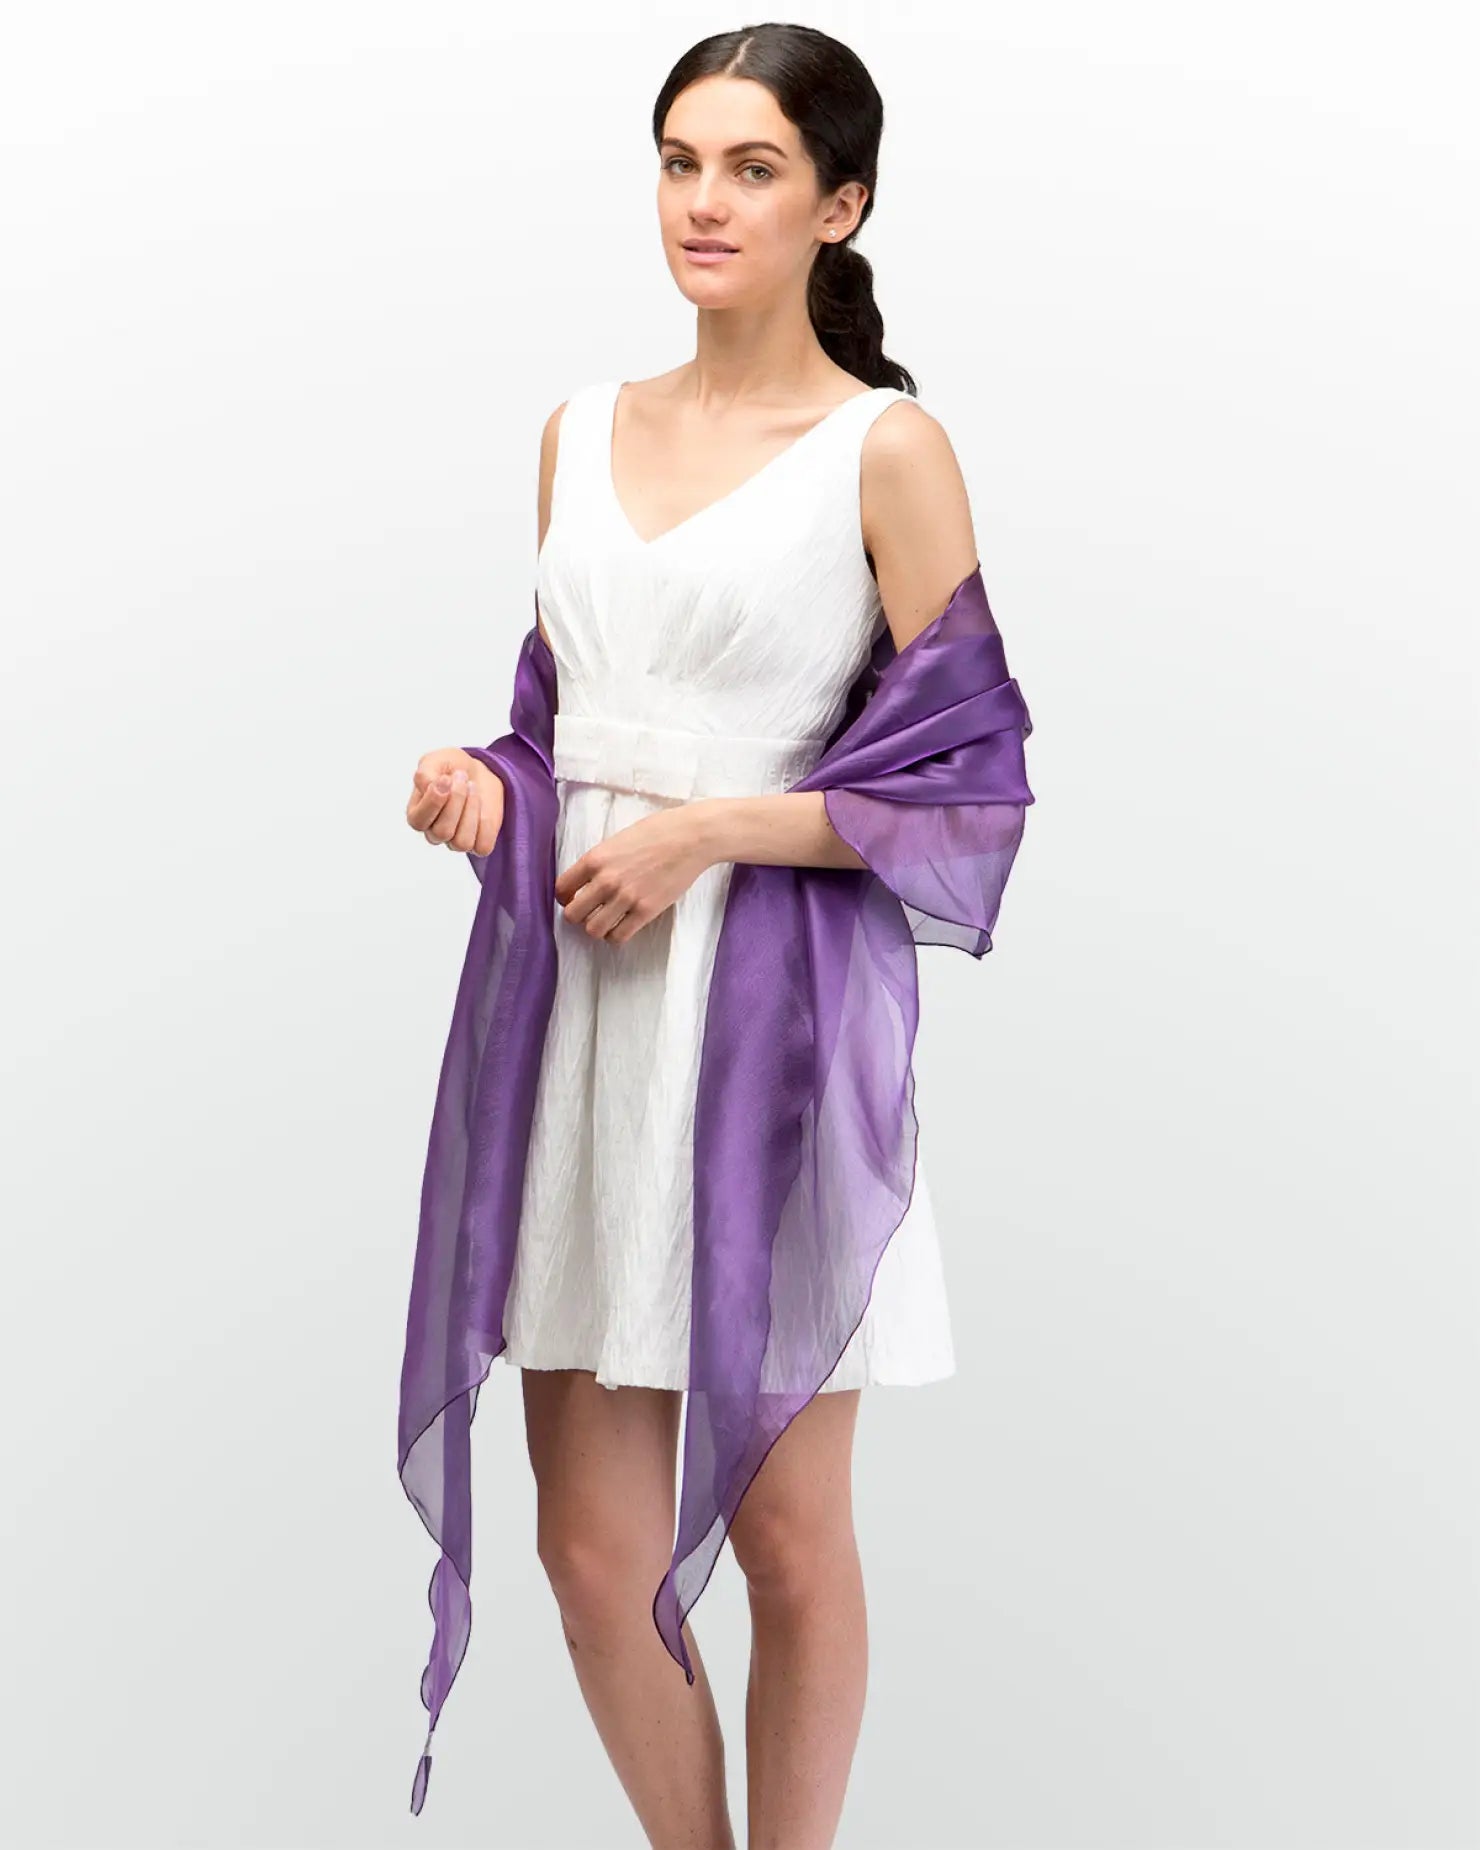 Woman wearing white dress and purple scarf, Sheer Shimmer Evening Lightweight Stole